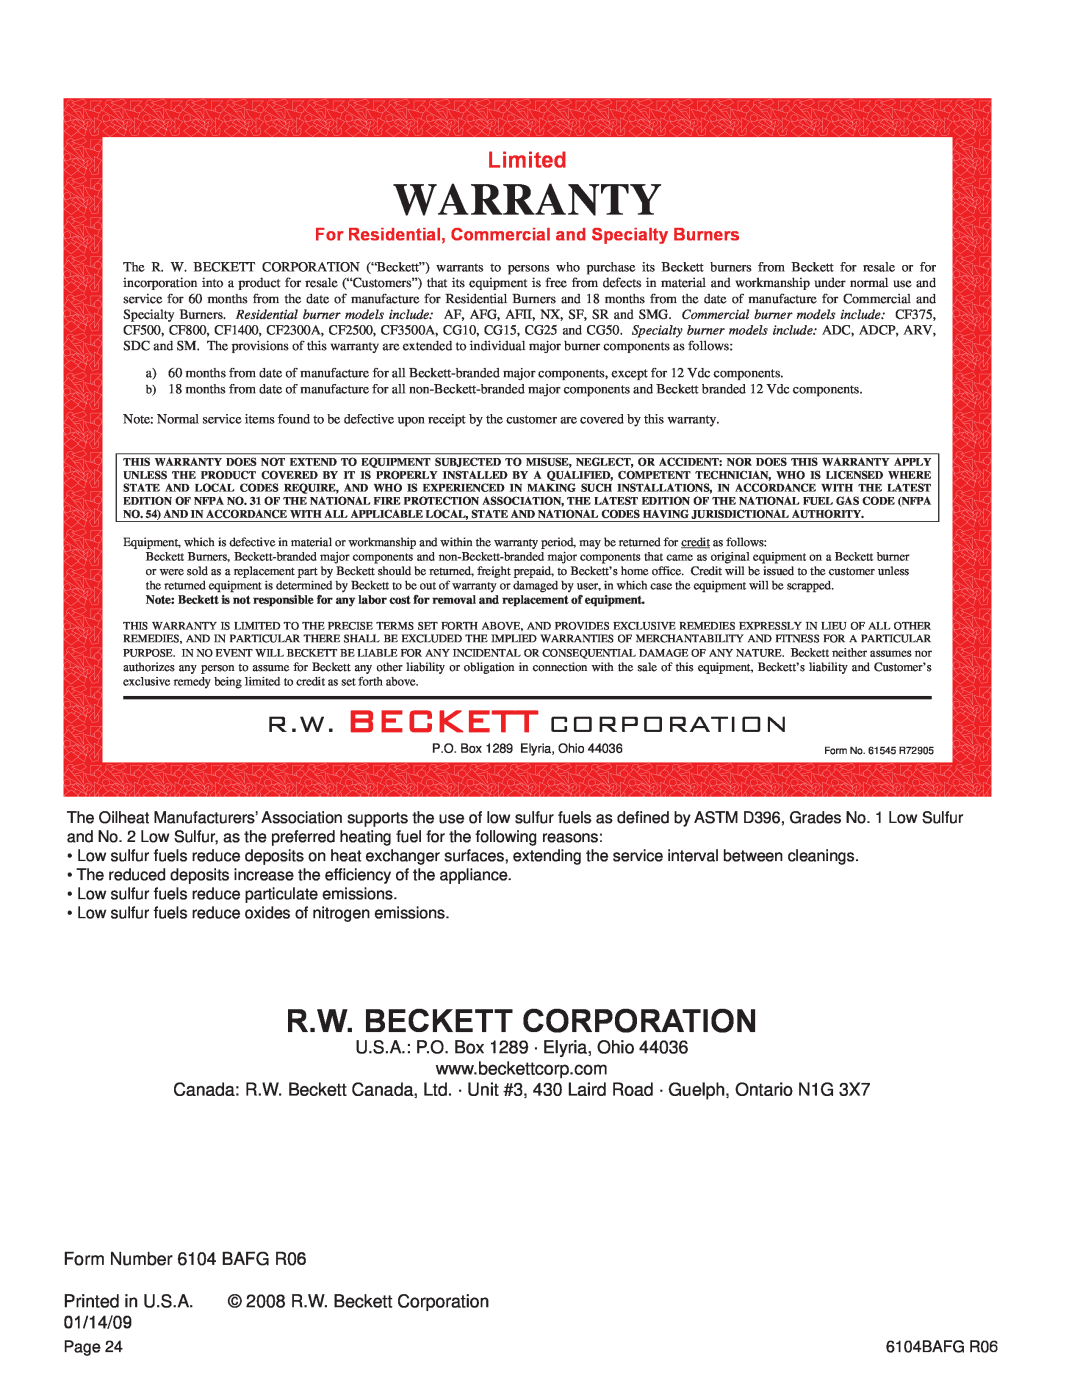 Weil-McLain UO-4 CV manual R.W. Beckett Corporation, Warranty, Limited, For Residential, Commercial and Specialty Burners 